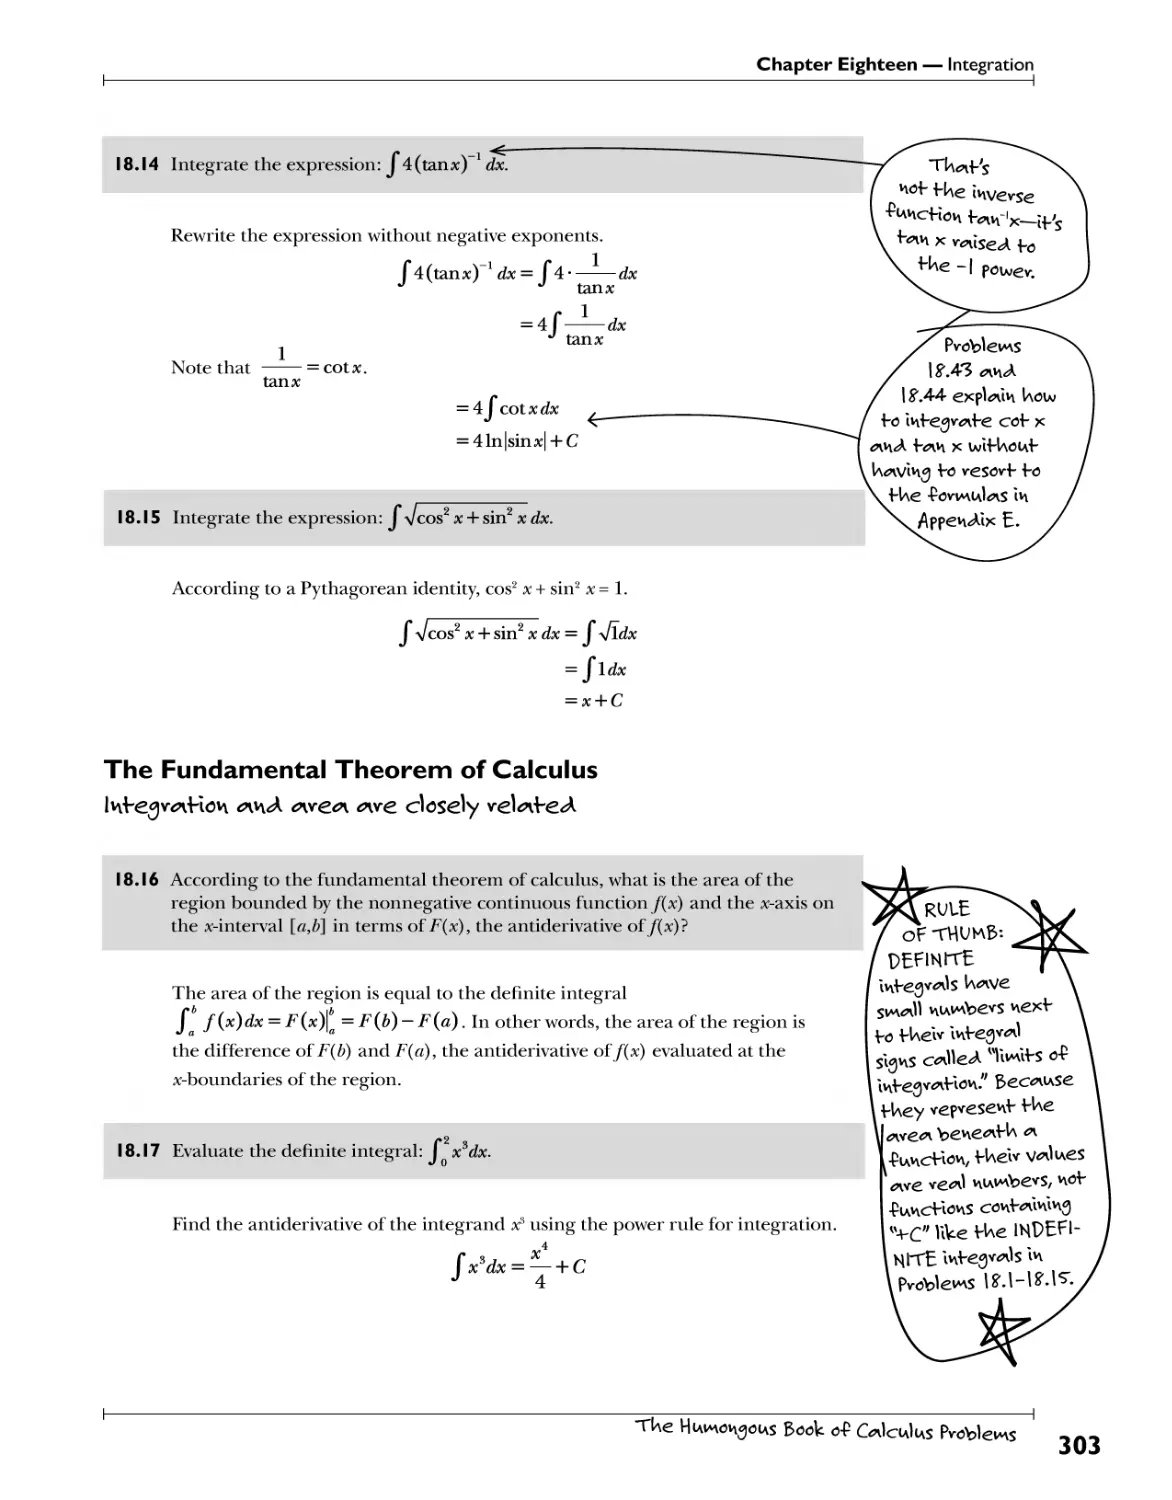 The Fundamental Theorem of Calculus 303